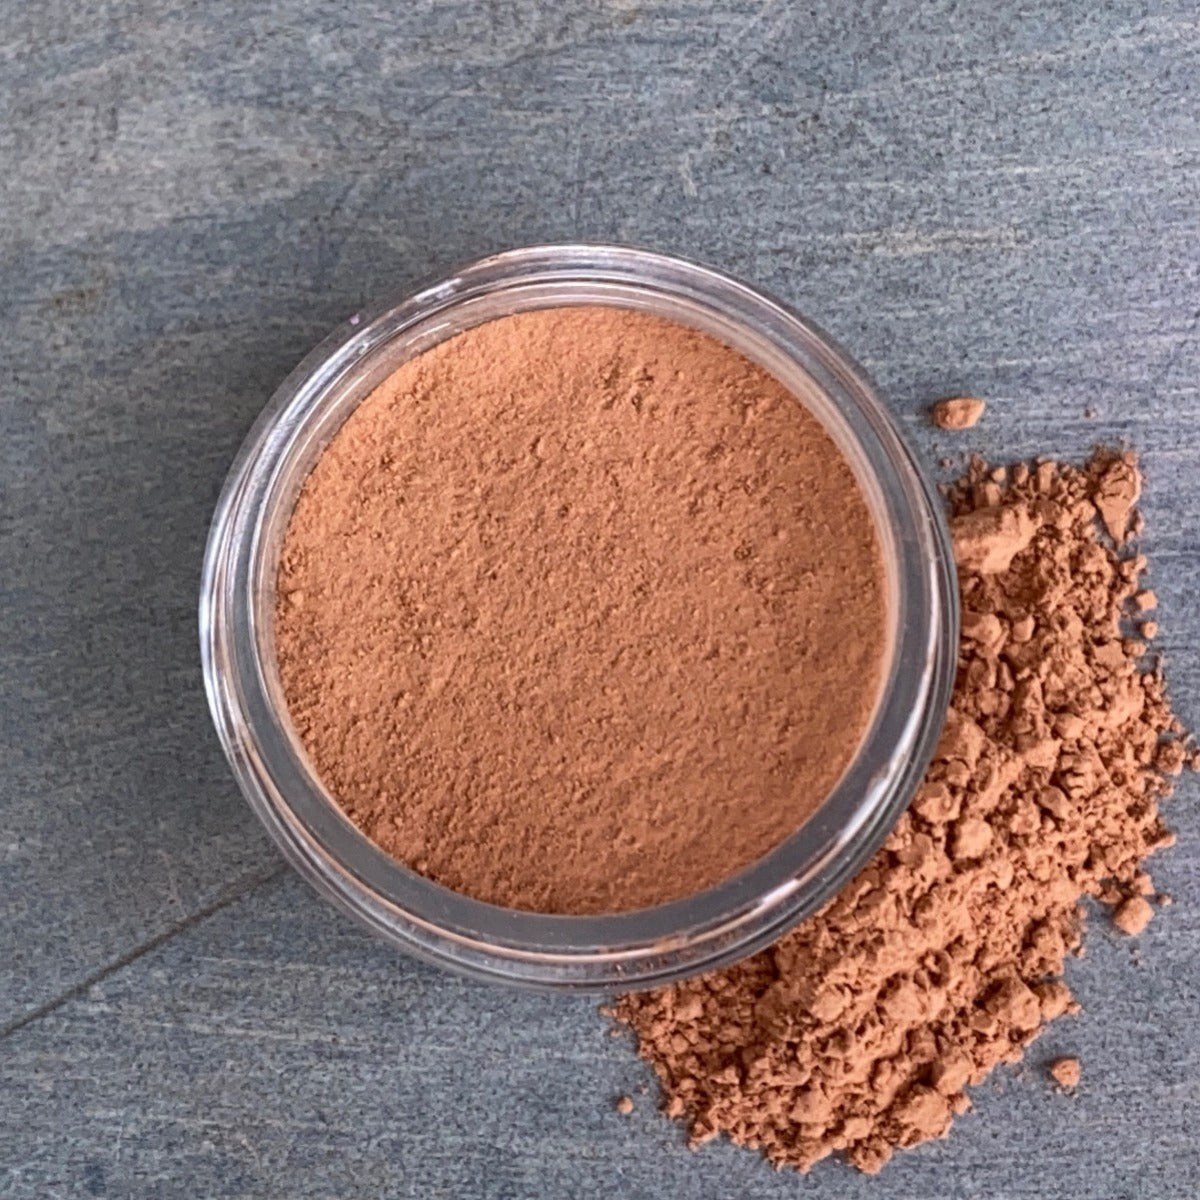 Beach Tan Powder Bronzer: A cosmetic jar with some of the blush powder alongside, showcasing the warm tan hue for a sun-kissed glow